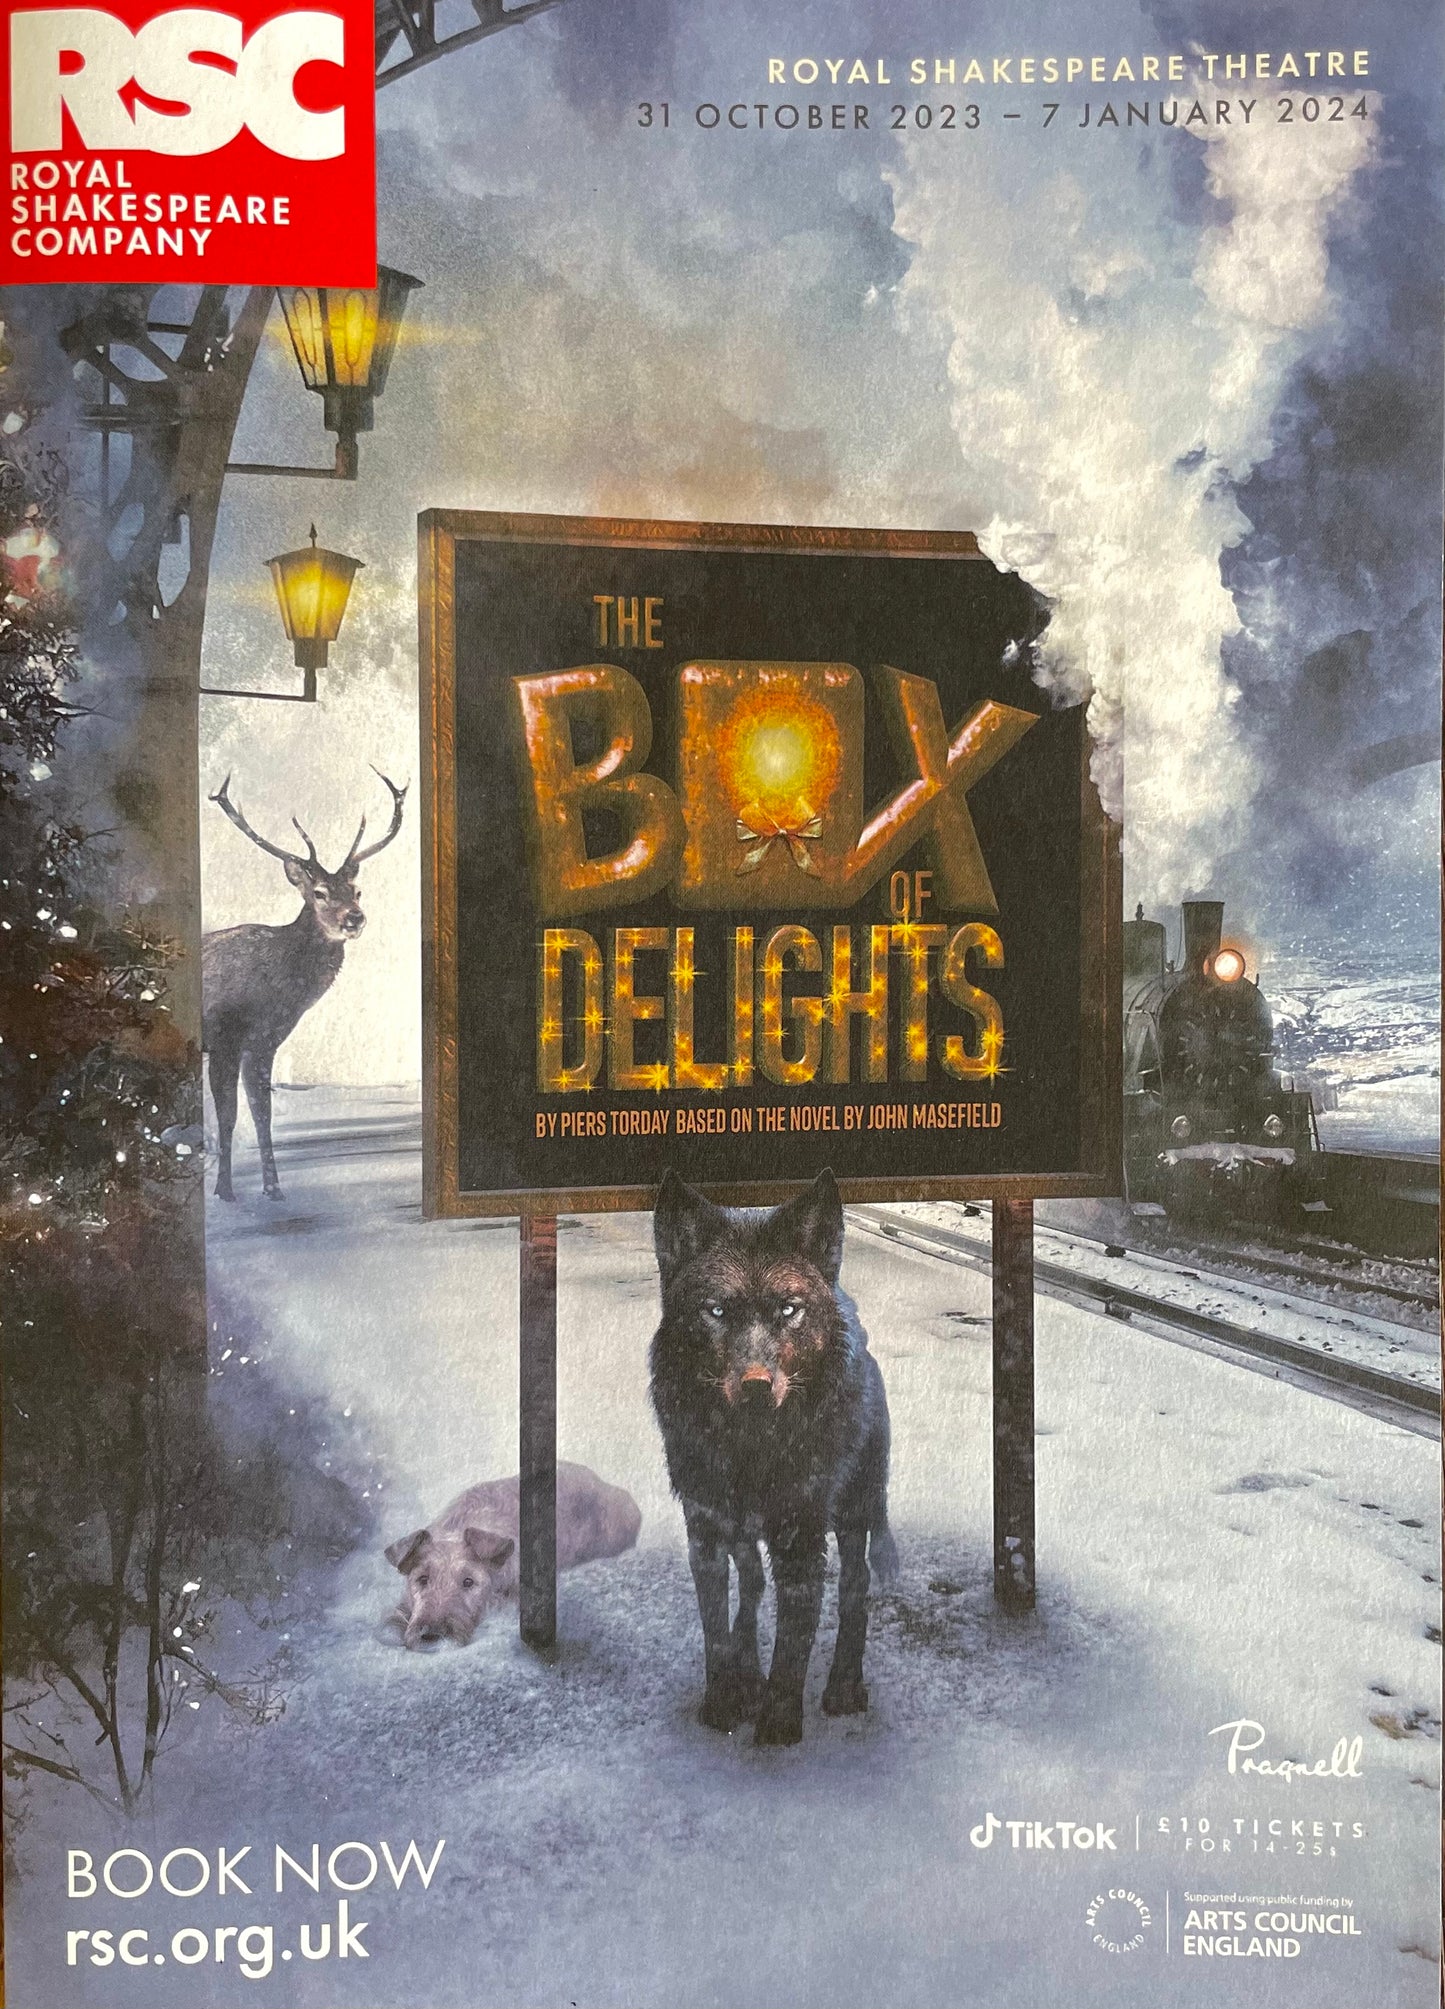 Royal Shakespeare Company - Whats On - The Box Of Delights  - 31st October - 7th January 24